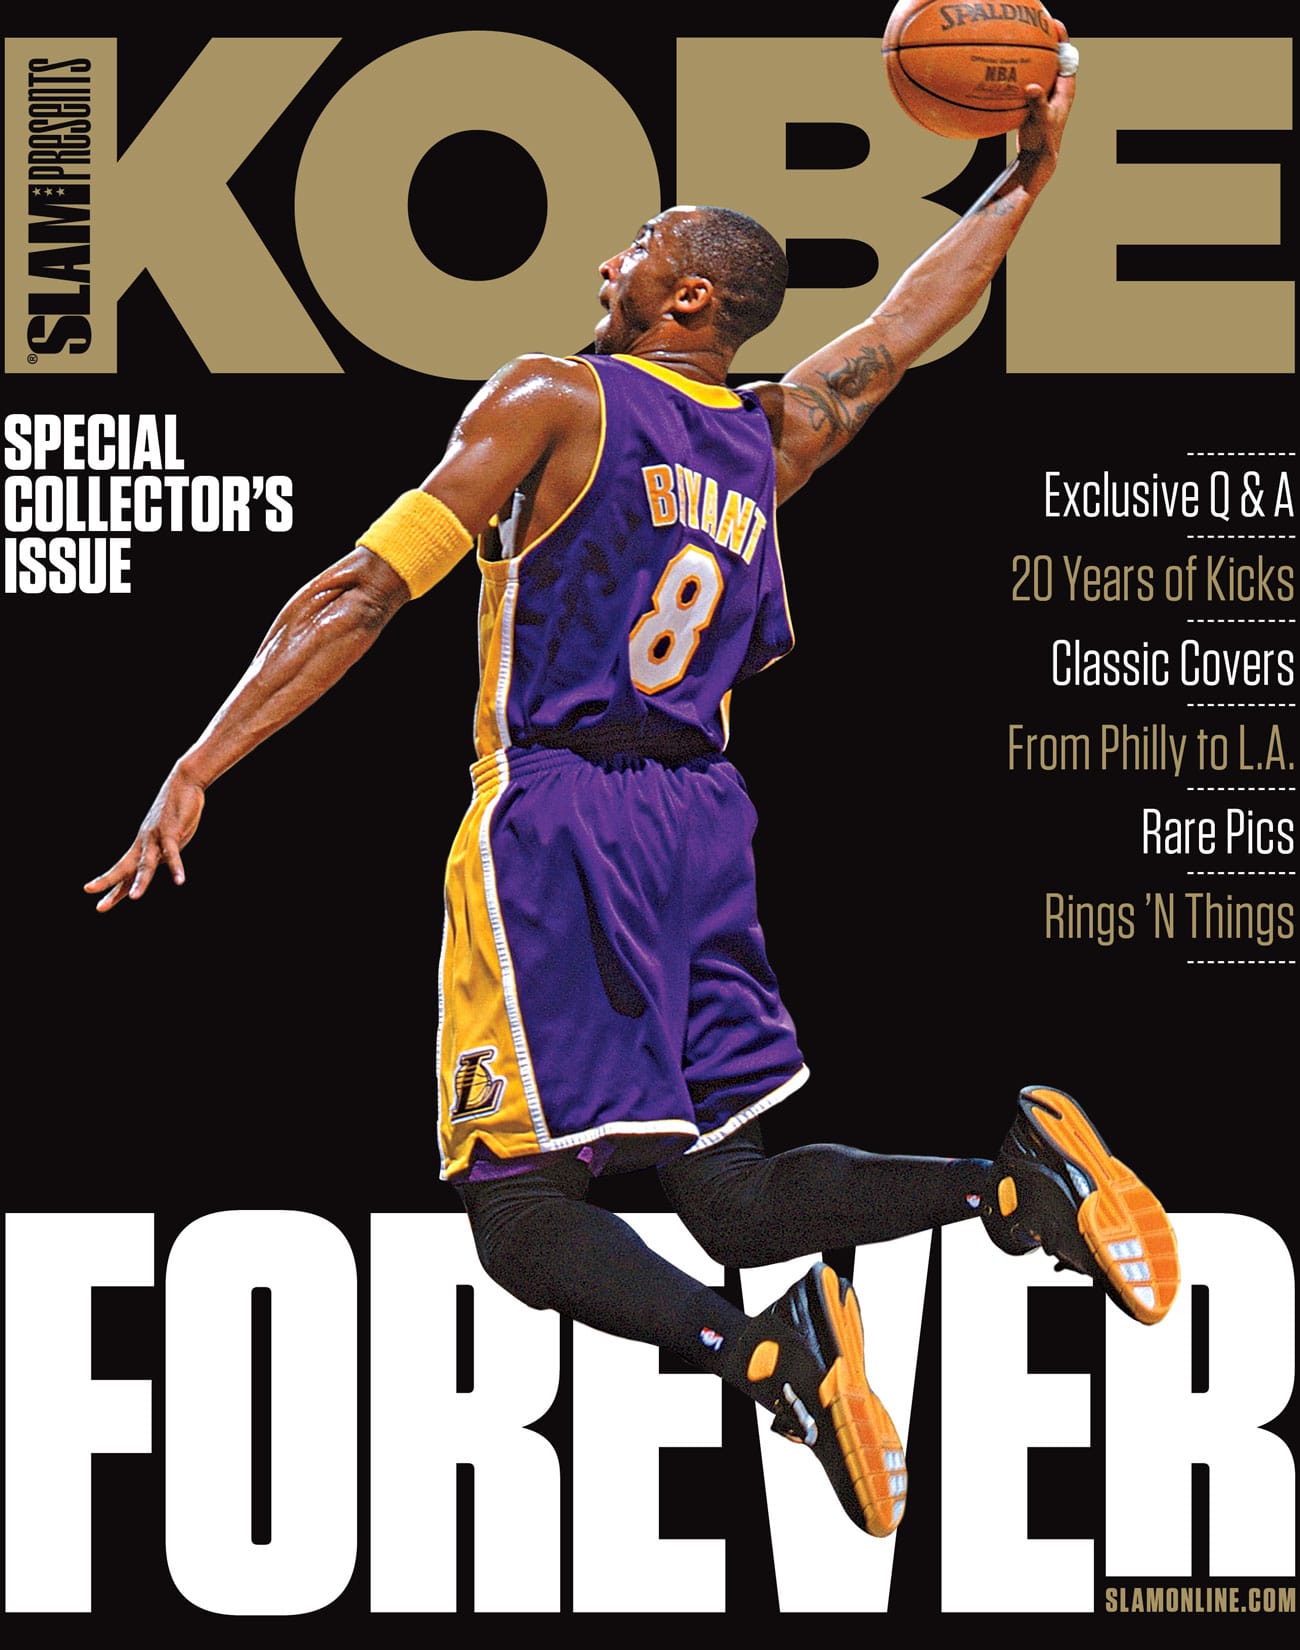 Check out All of Kobe Bryant's Iconic SLAM Covers 🐍